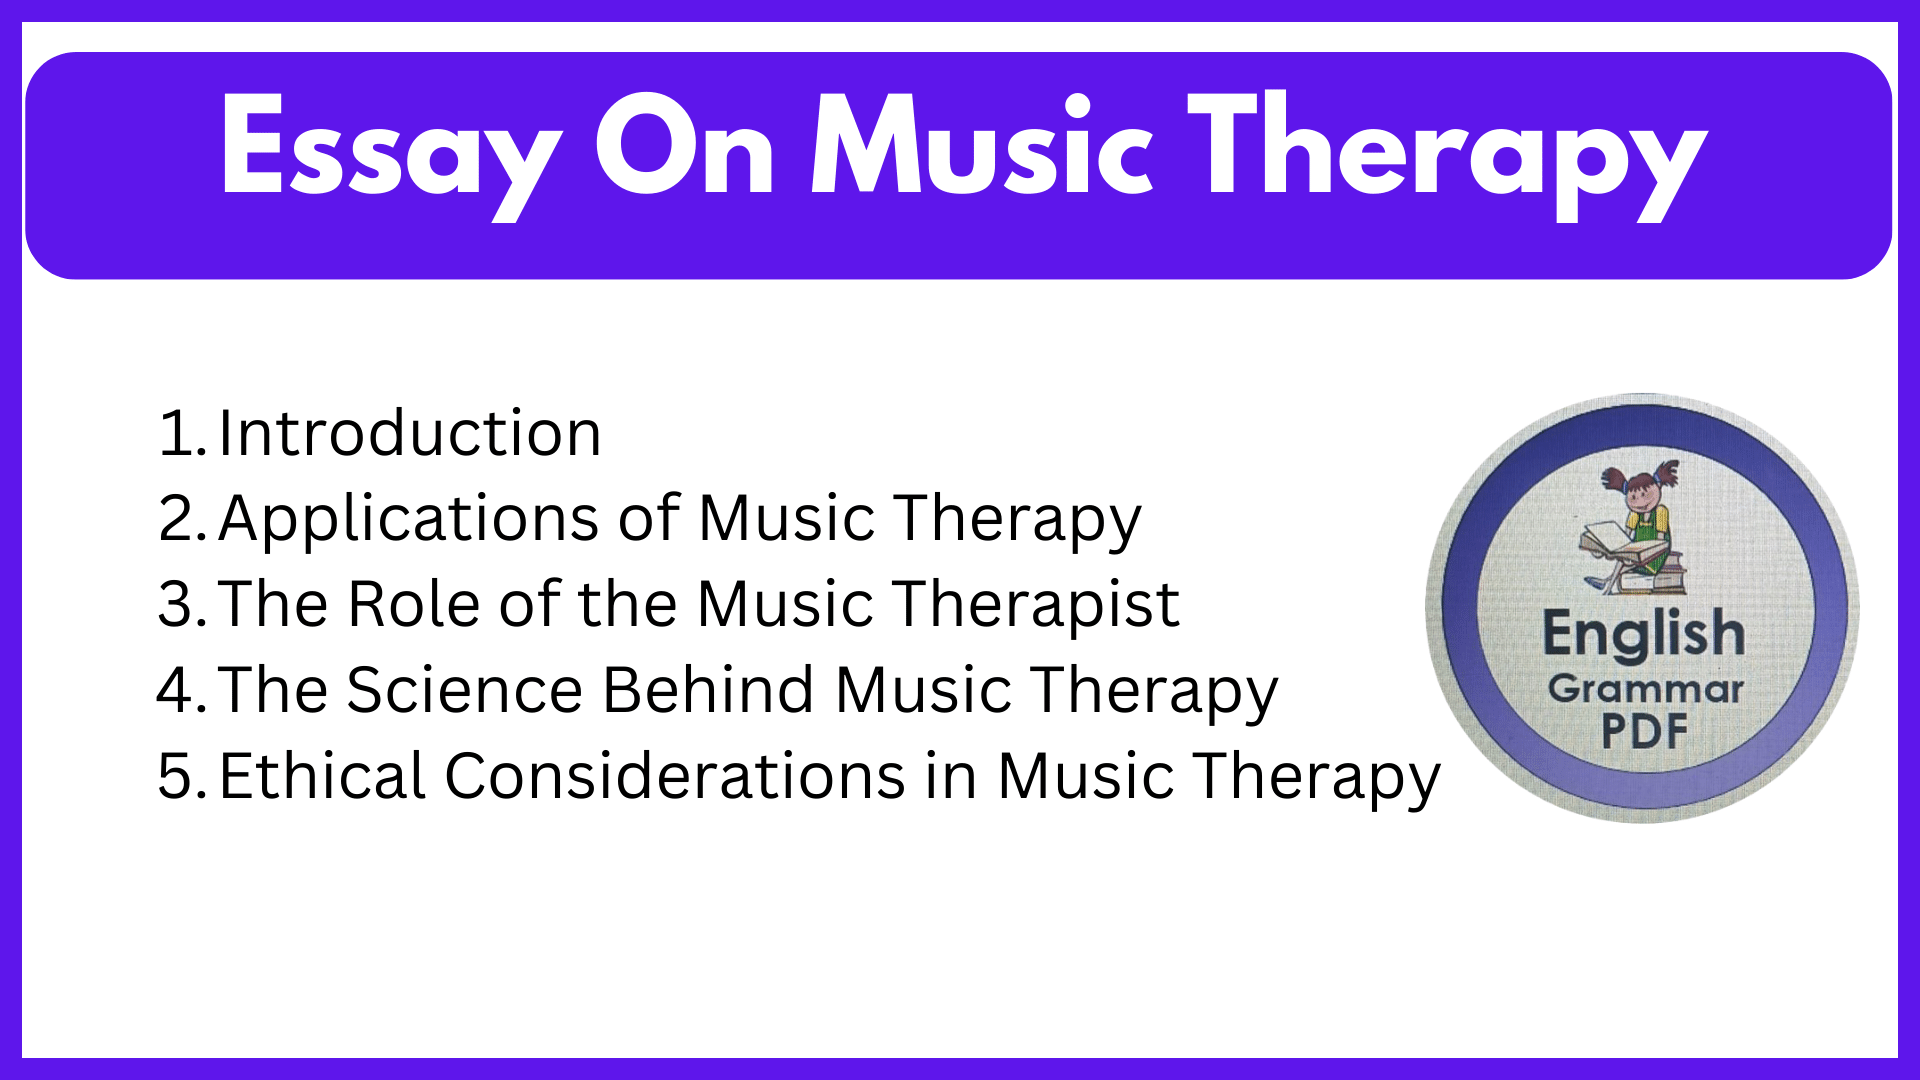 Essay On Music Therapy